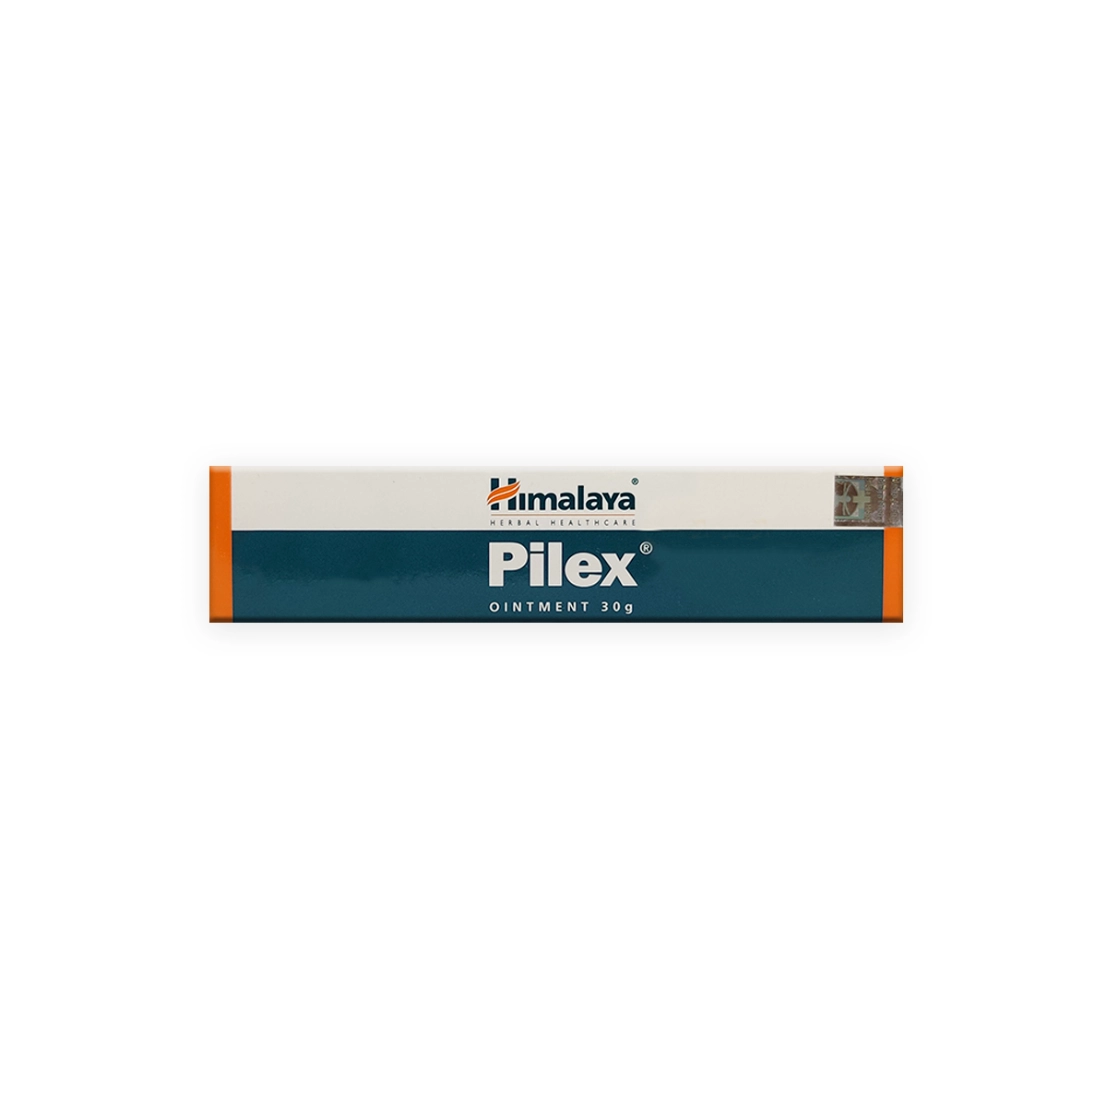 First product image of Himalaya Pilex Ointment 30g